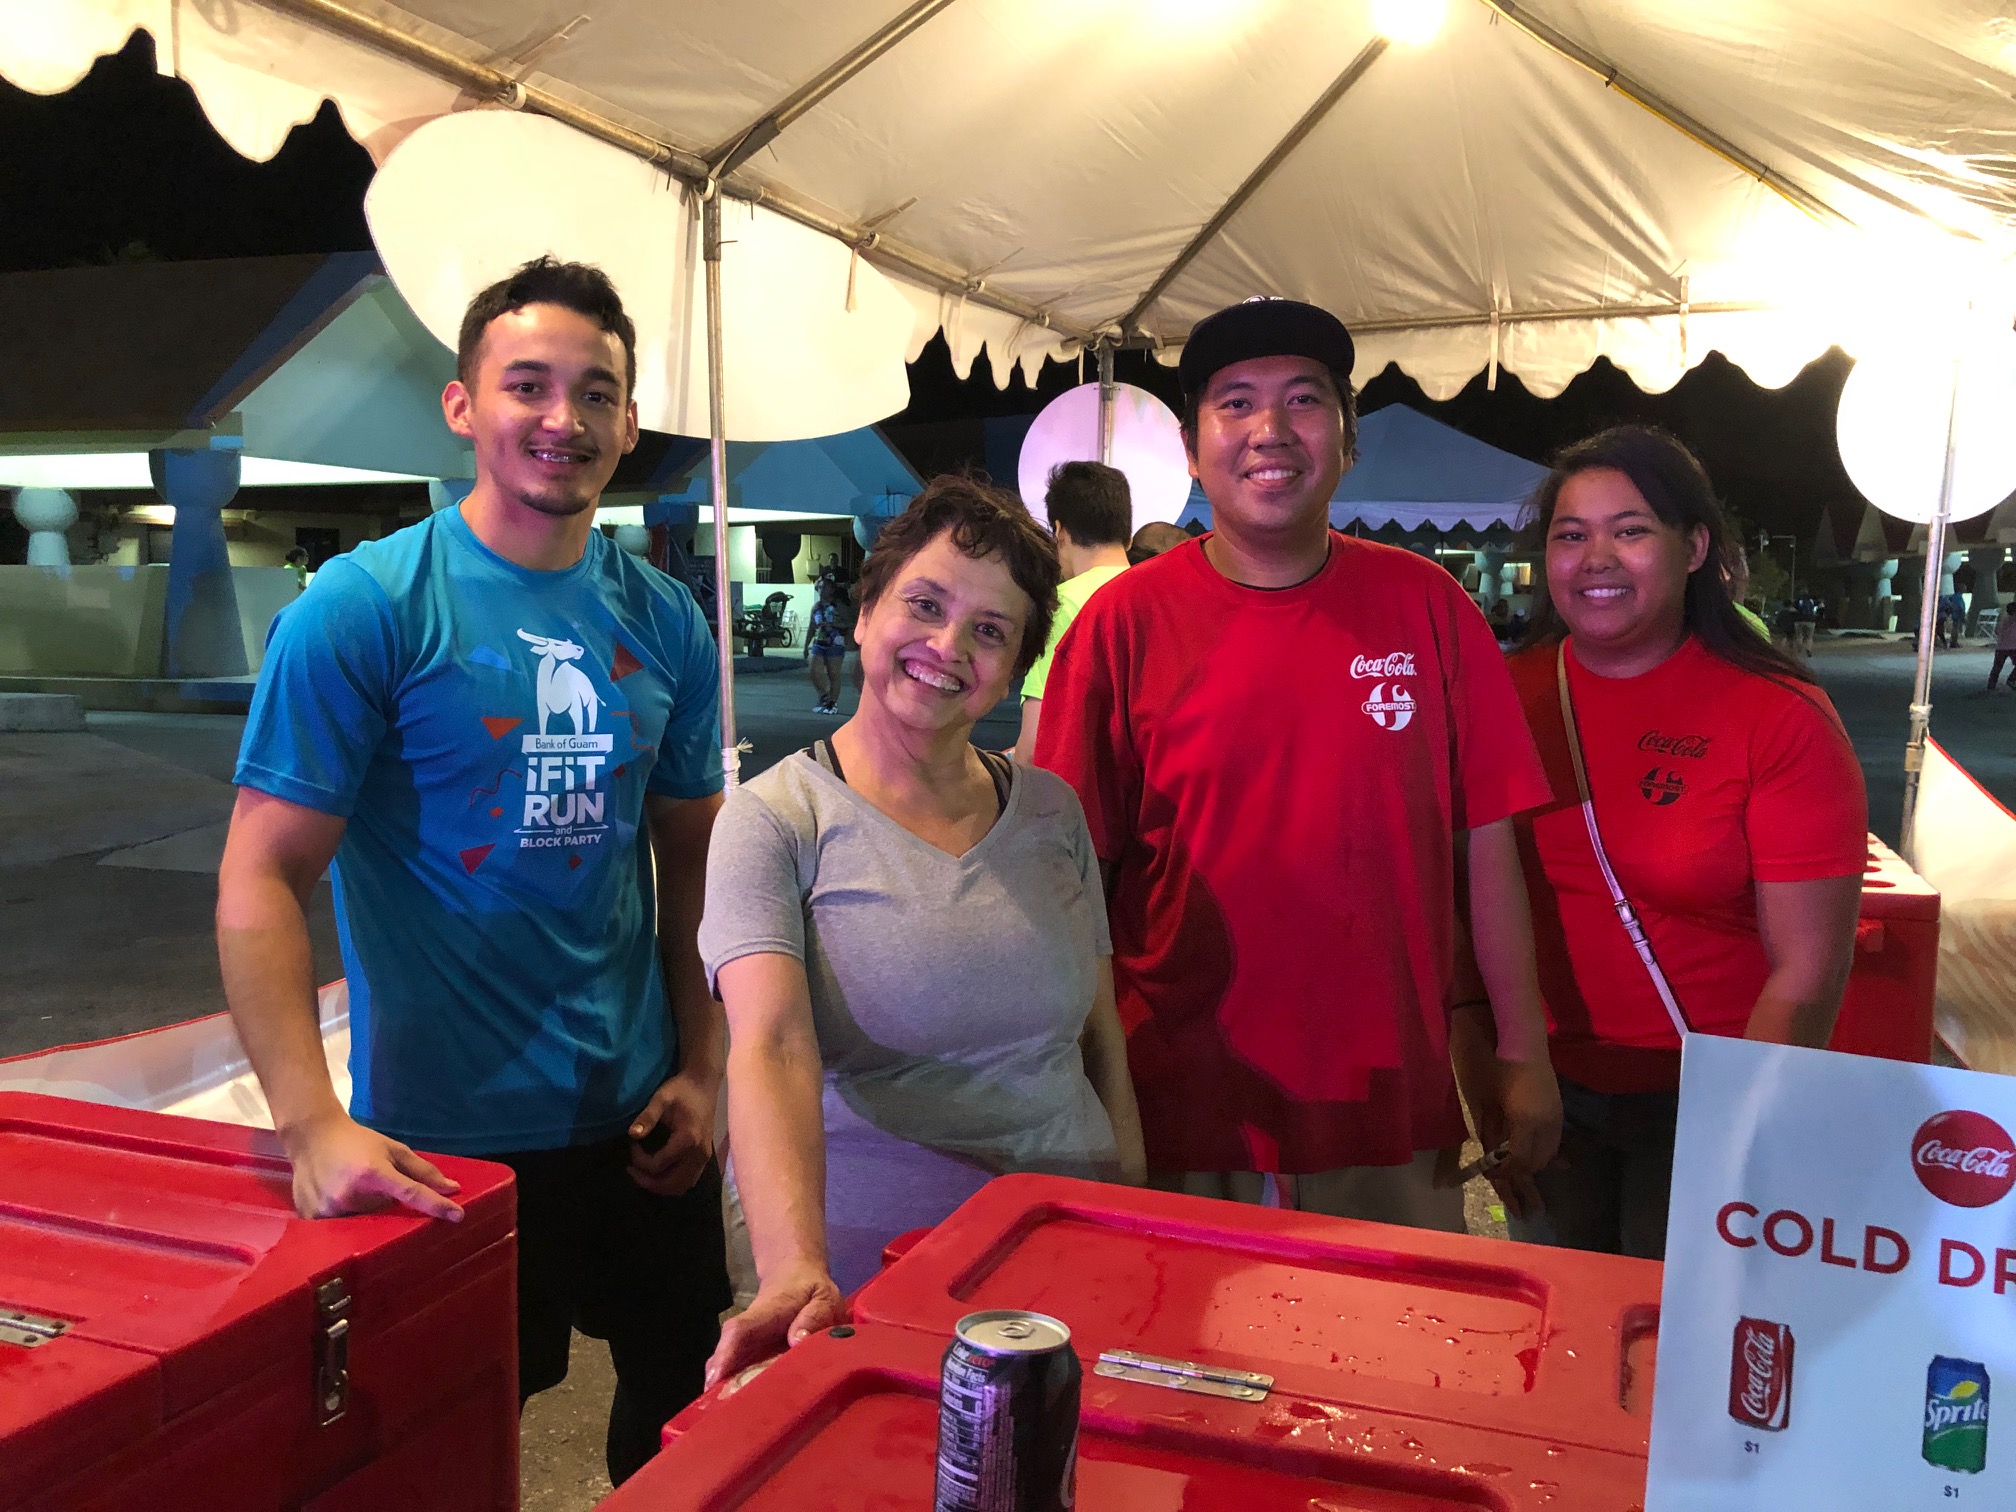 Coca-Cola and Powerade hydrate <br>Bank of Guam Block Party and Ifit Race